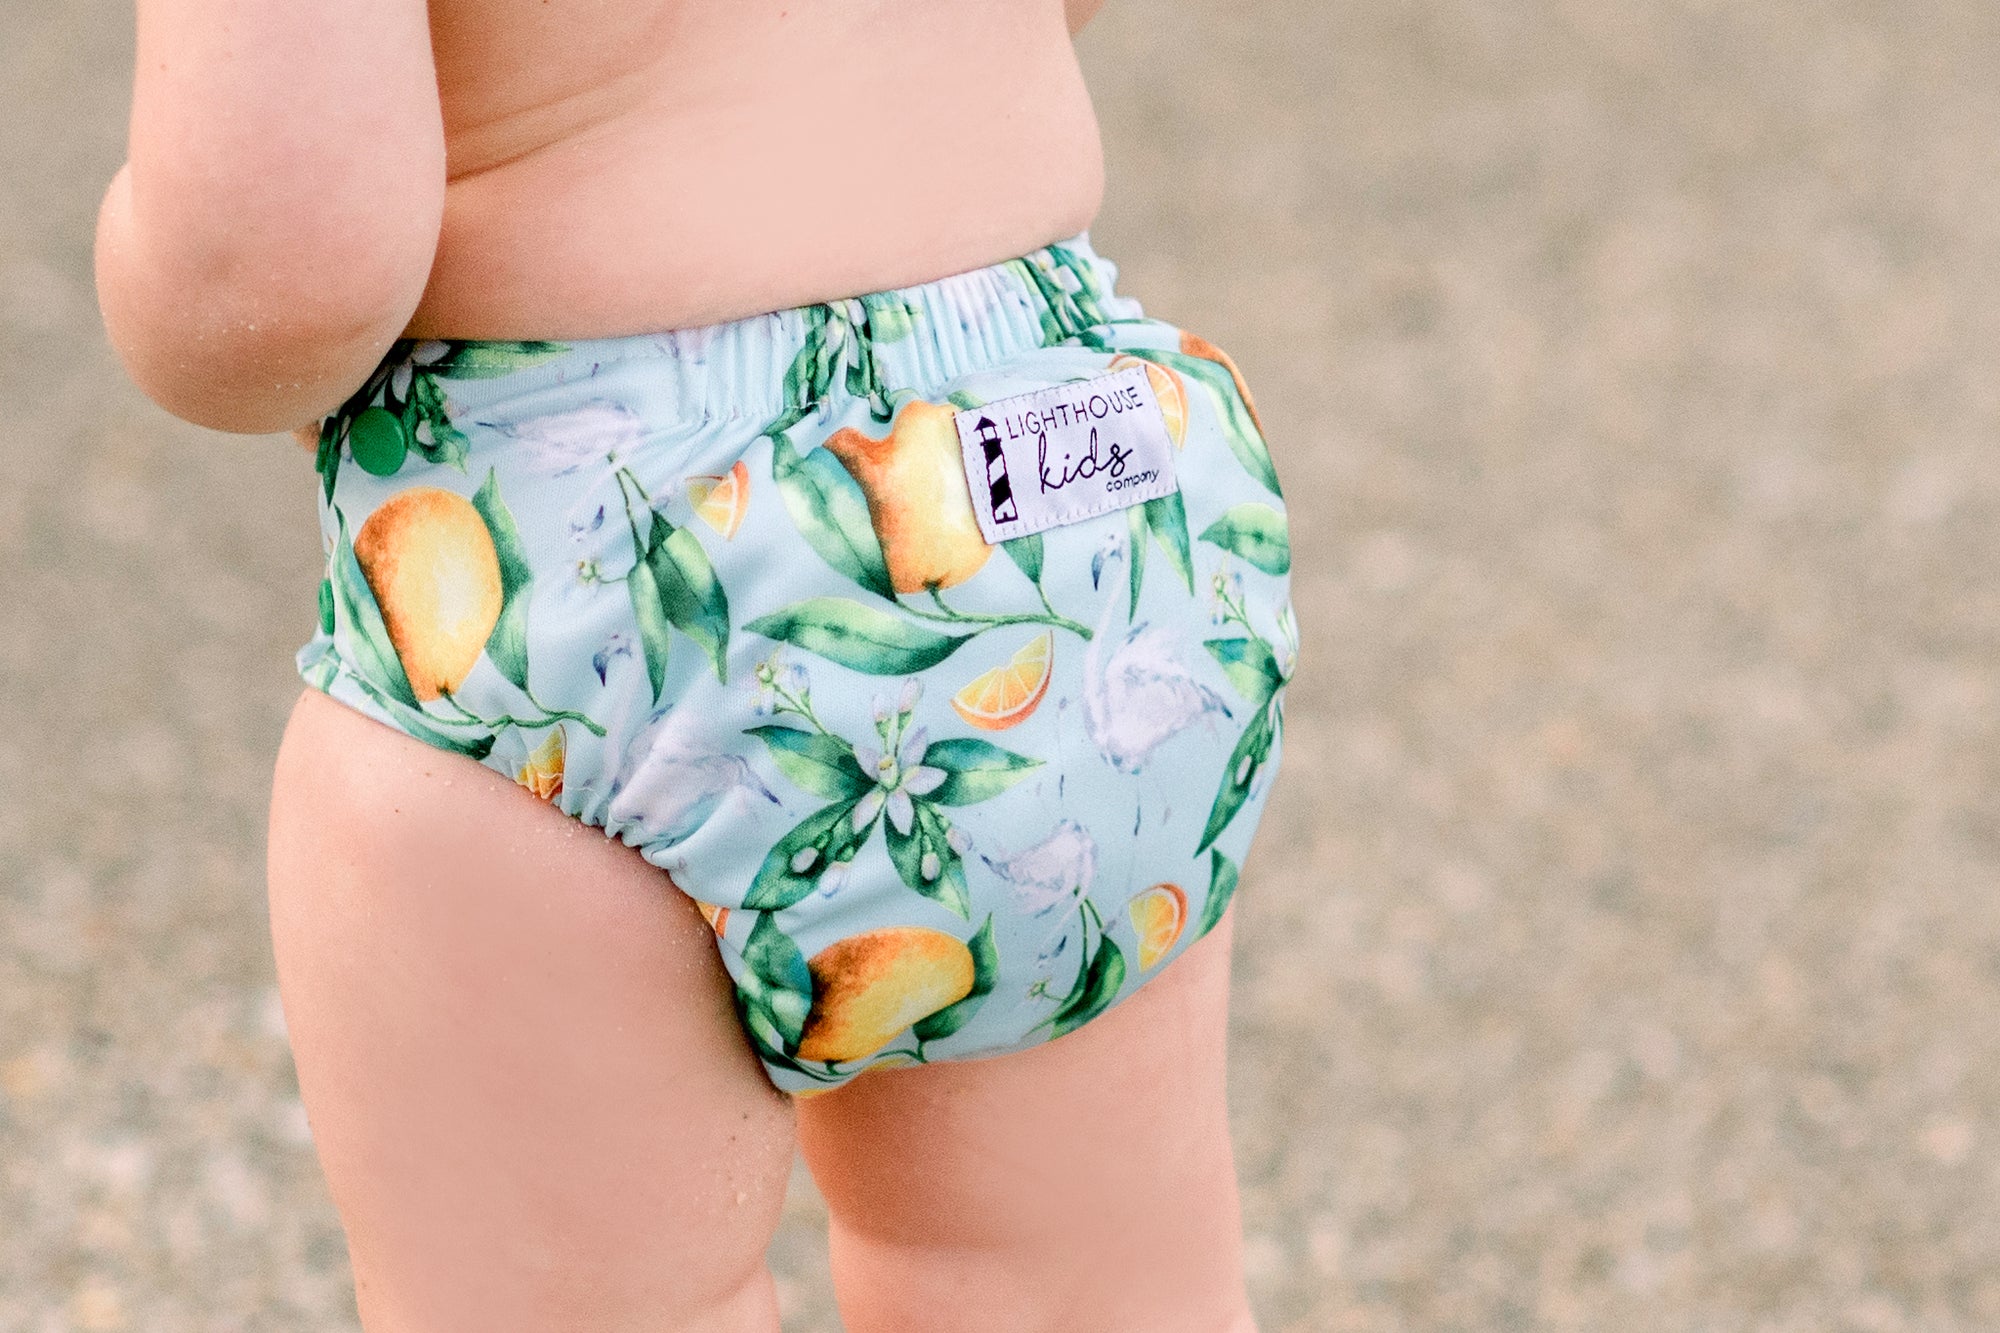 Top 3 Reasons For Using Cloth Diapers